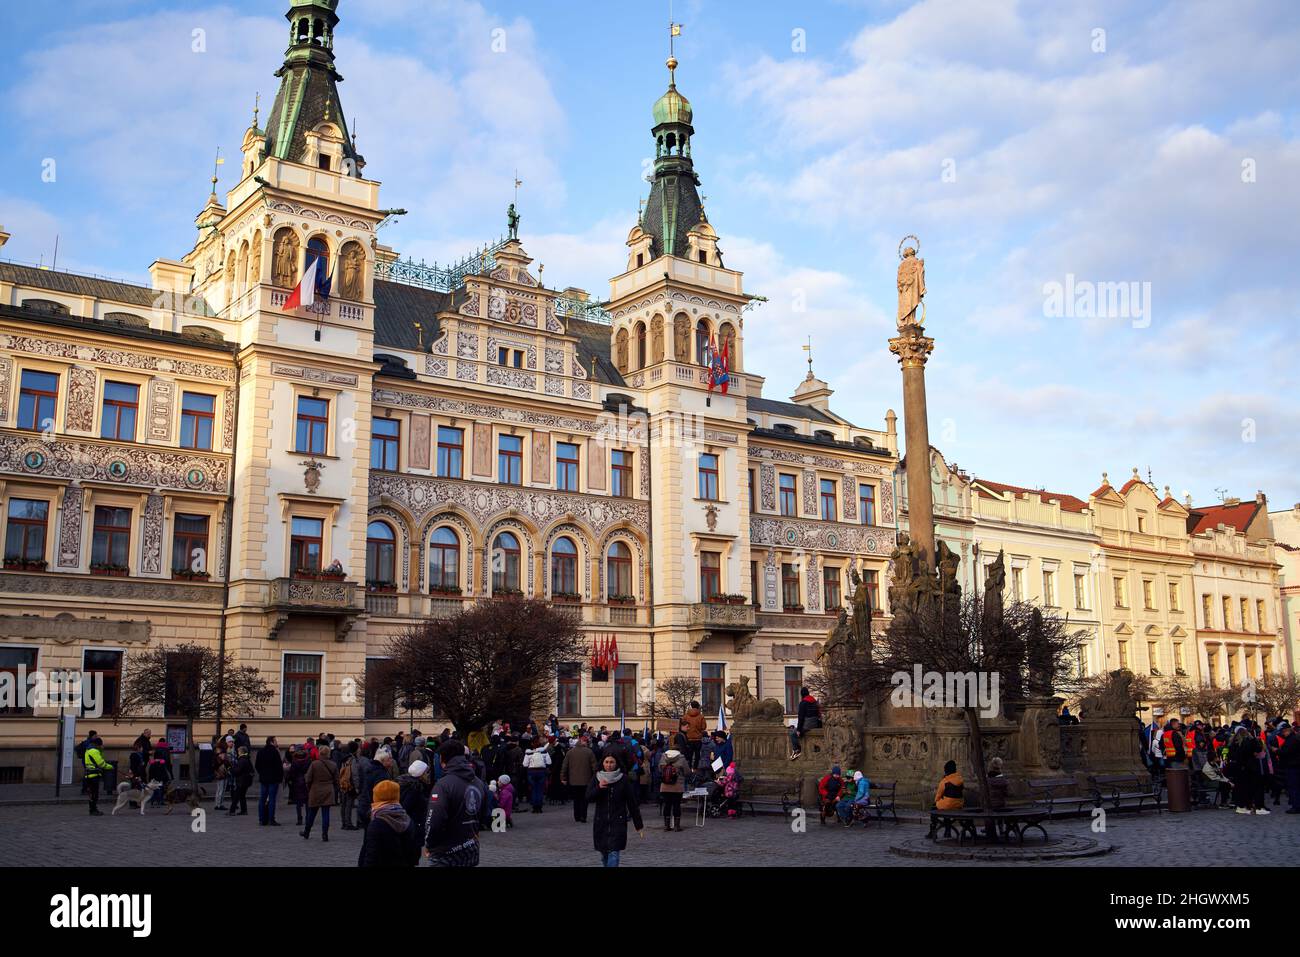 PARDUBICE, CZECH REPUBLIC - jANUARY 15, 2022: Anti-vaccine demonstration or protest during coronavirus pandemic in front of the town hall at Pernstyn Stock Photo